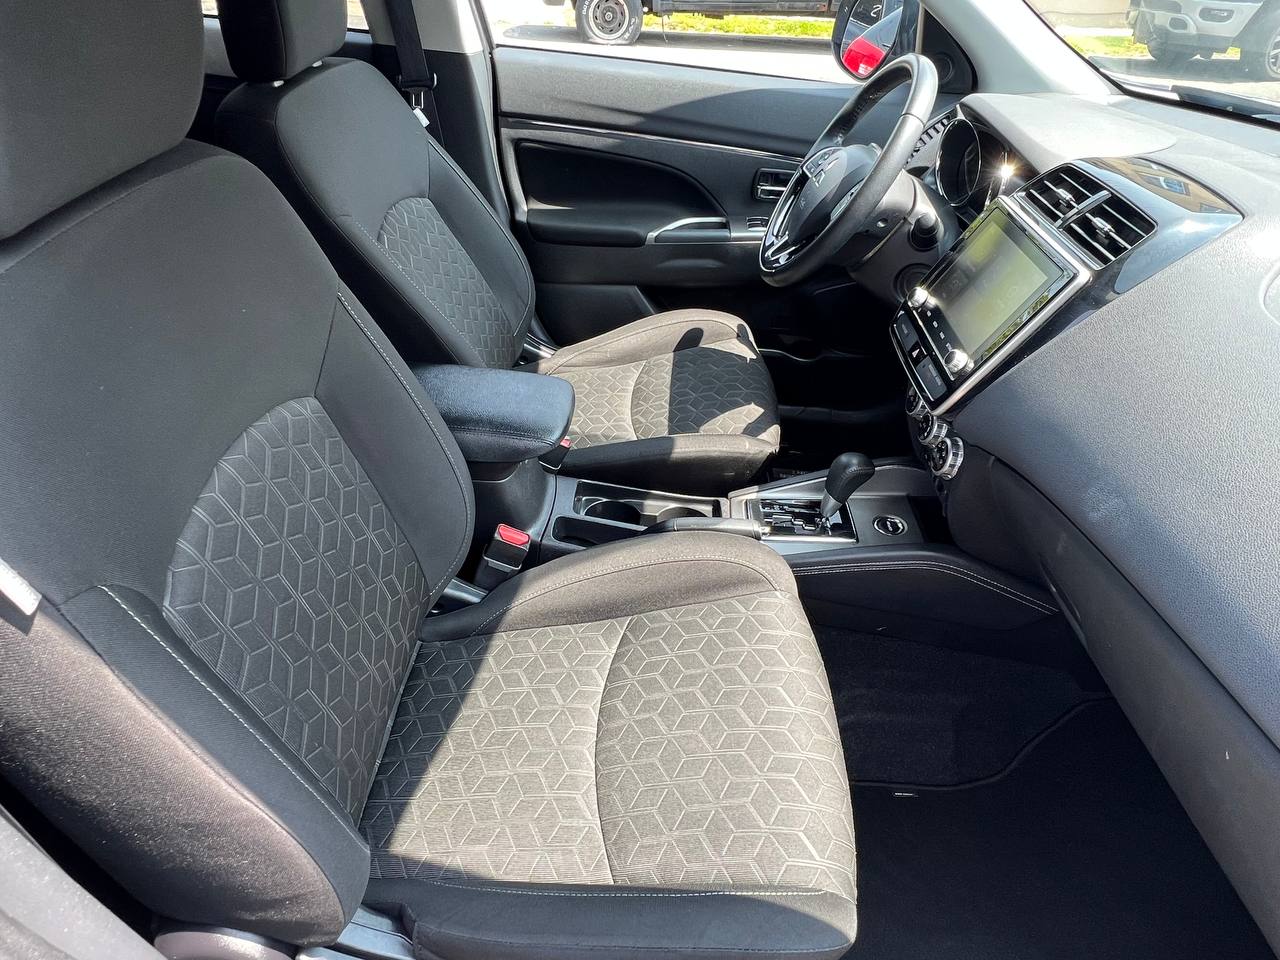 Used - Mitsubishi Outlander Sport SE AWD Wagon for sale in Staten Island NY